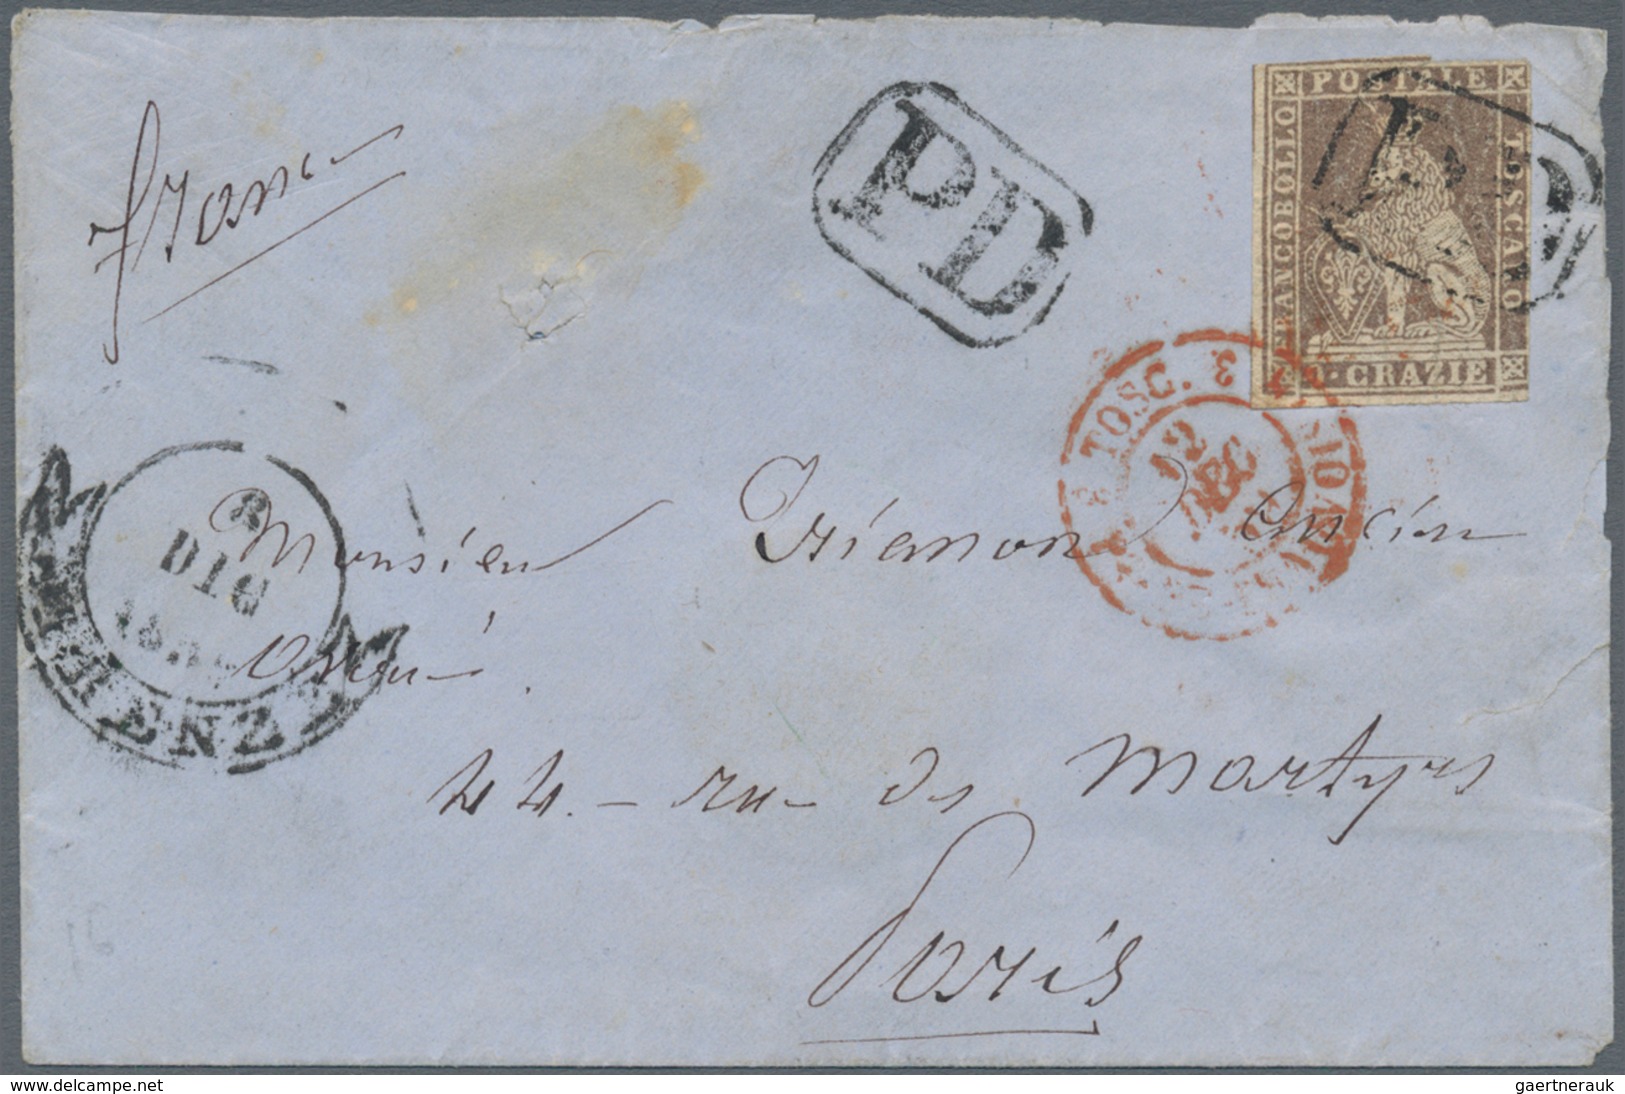 00913 Italien - Altitalienische Staaten: Toscana: 1859: 9 Crazie Lila Brown, Used On A Letter To Paris And - Toscana